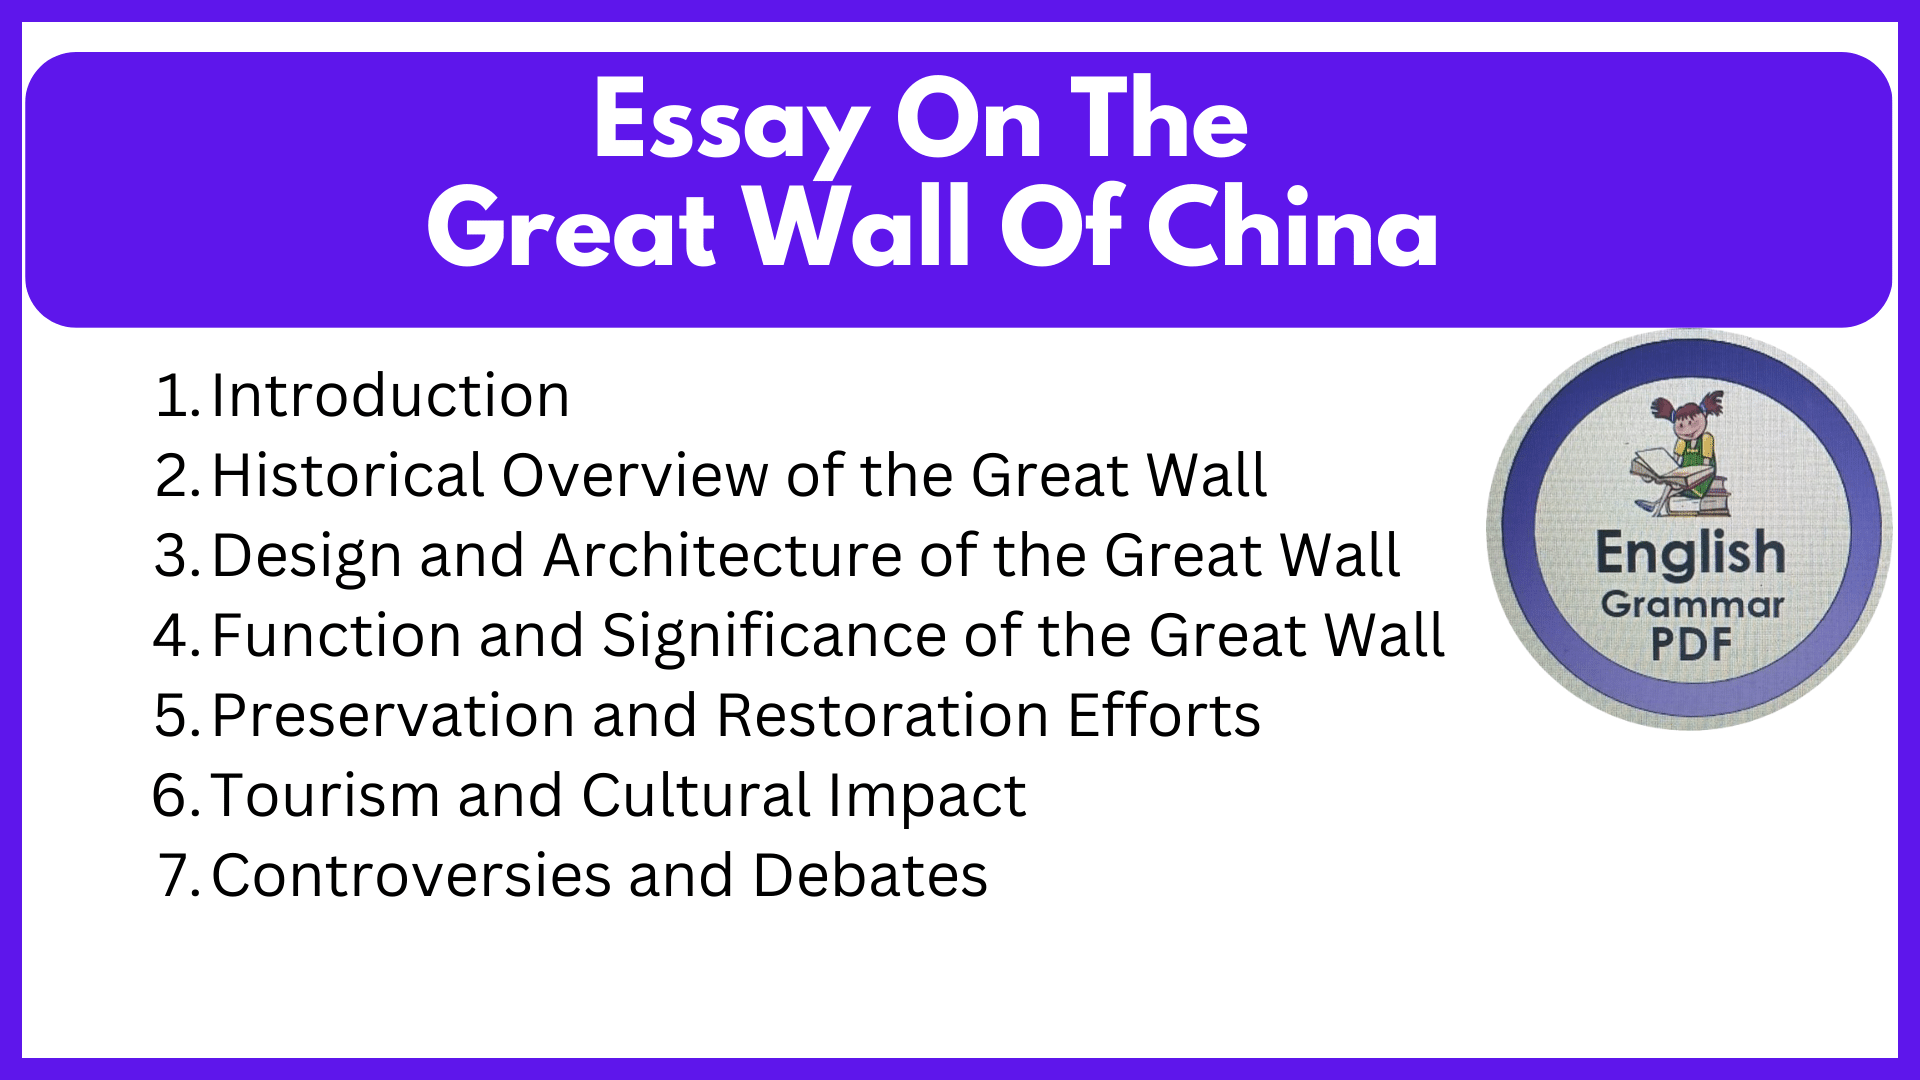 Essay On The Great Wall Of China